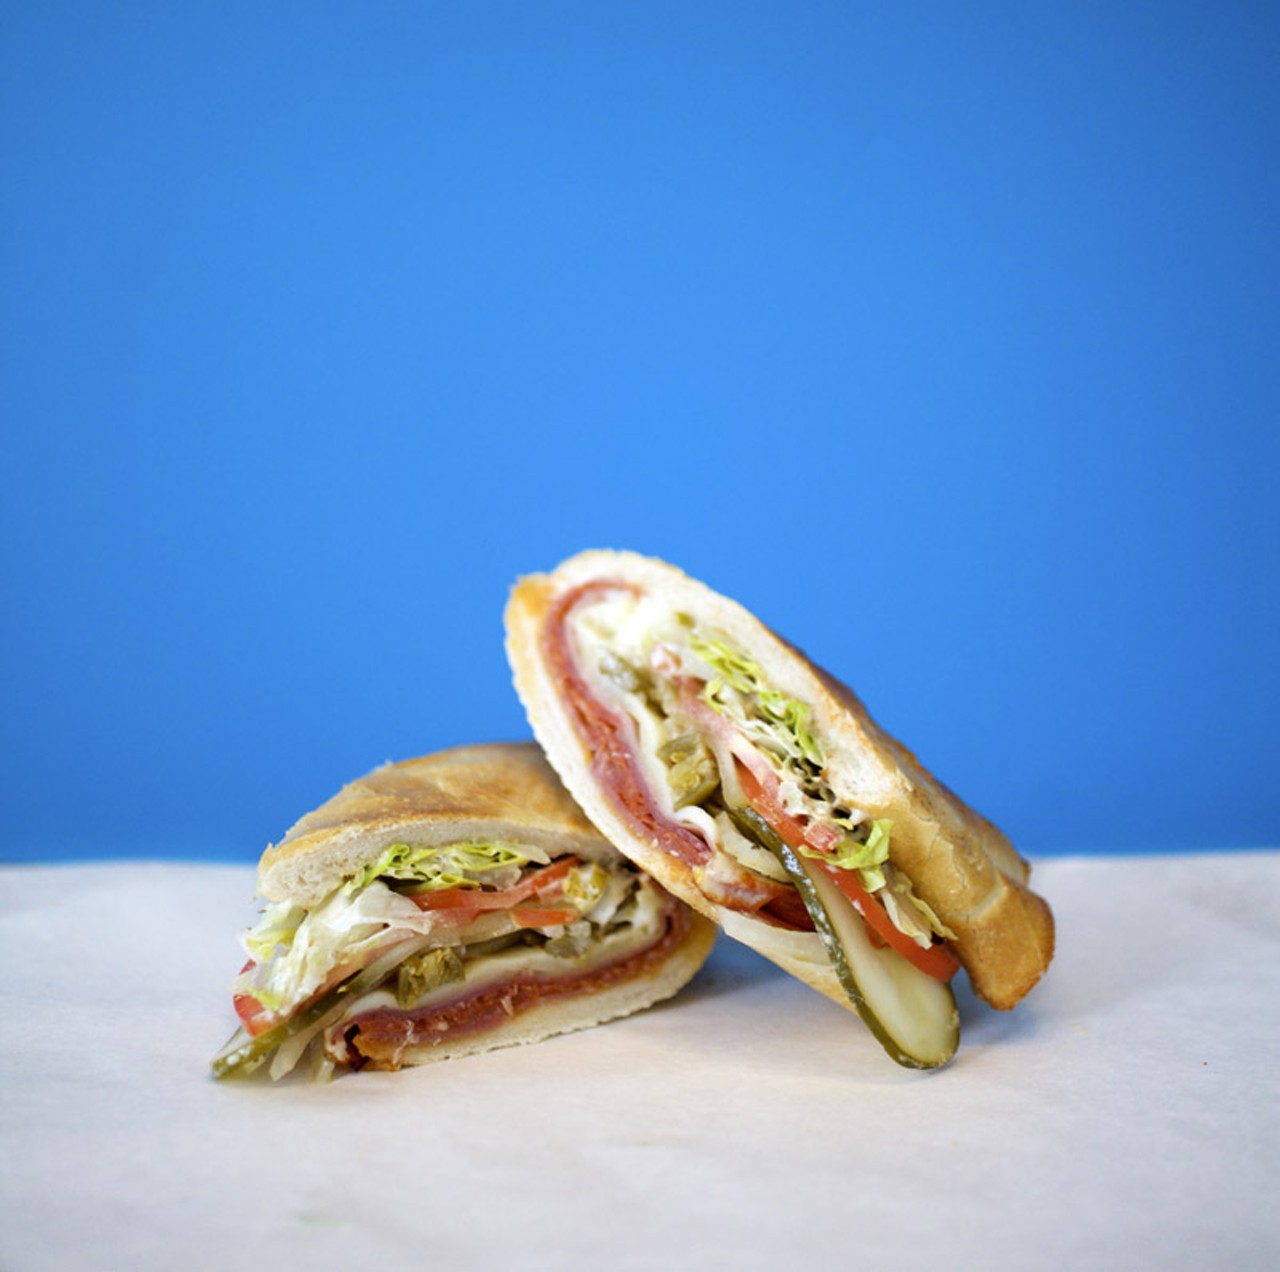 Snarf's Italian sandwich is made with pepperoni, capicola, mortadella, and provolone.